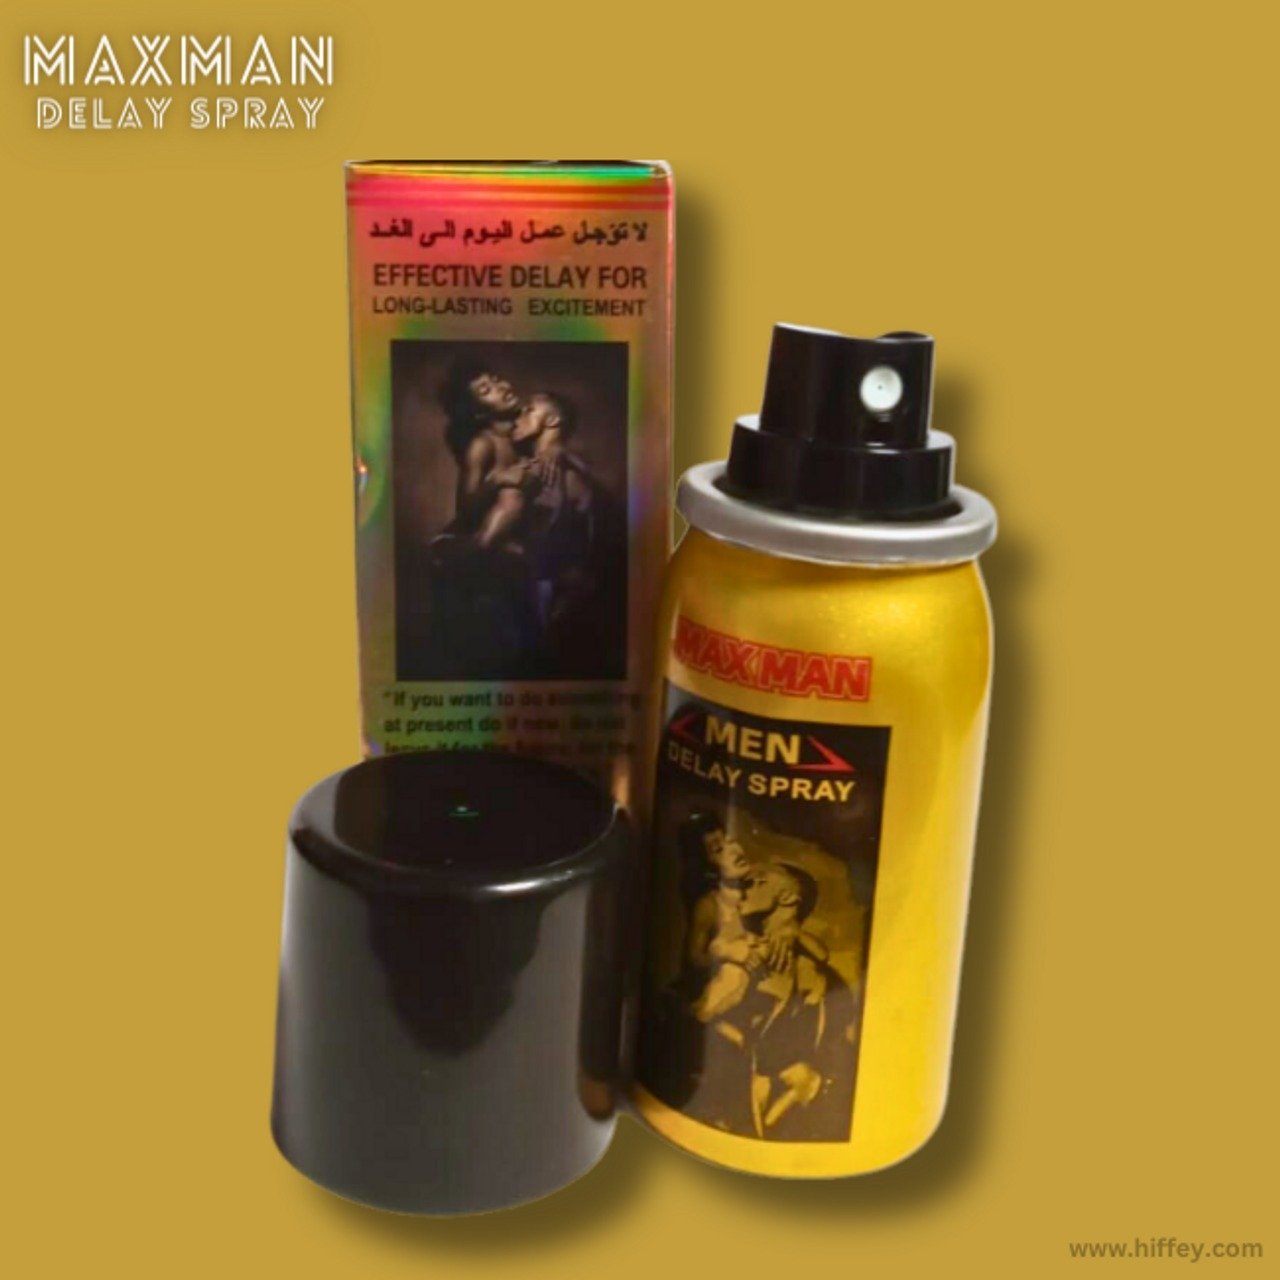 Buy Yellow Maxman Effective Long-lasting Delay Spray Price In Pakistan at Rs. 1800 from Likeshop.pk